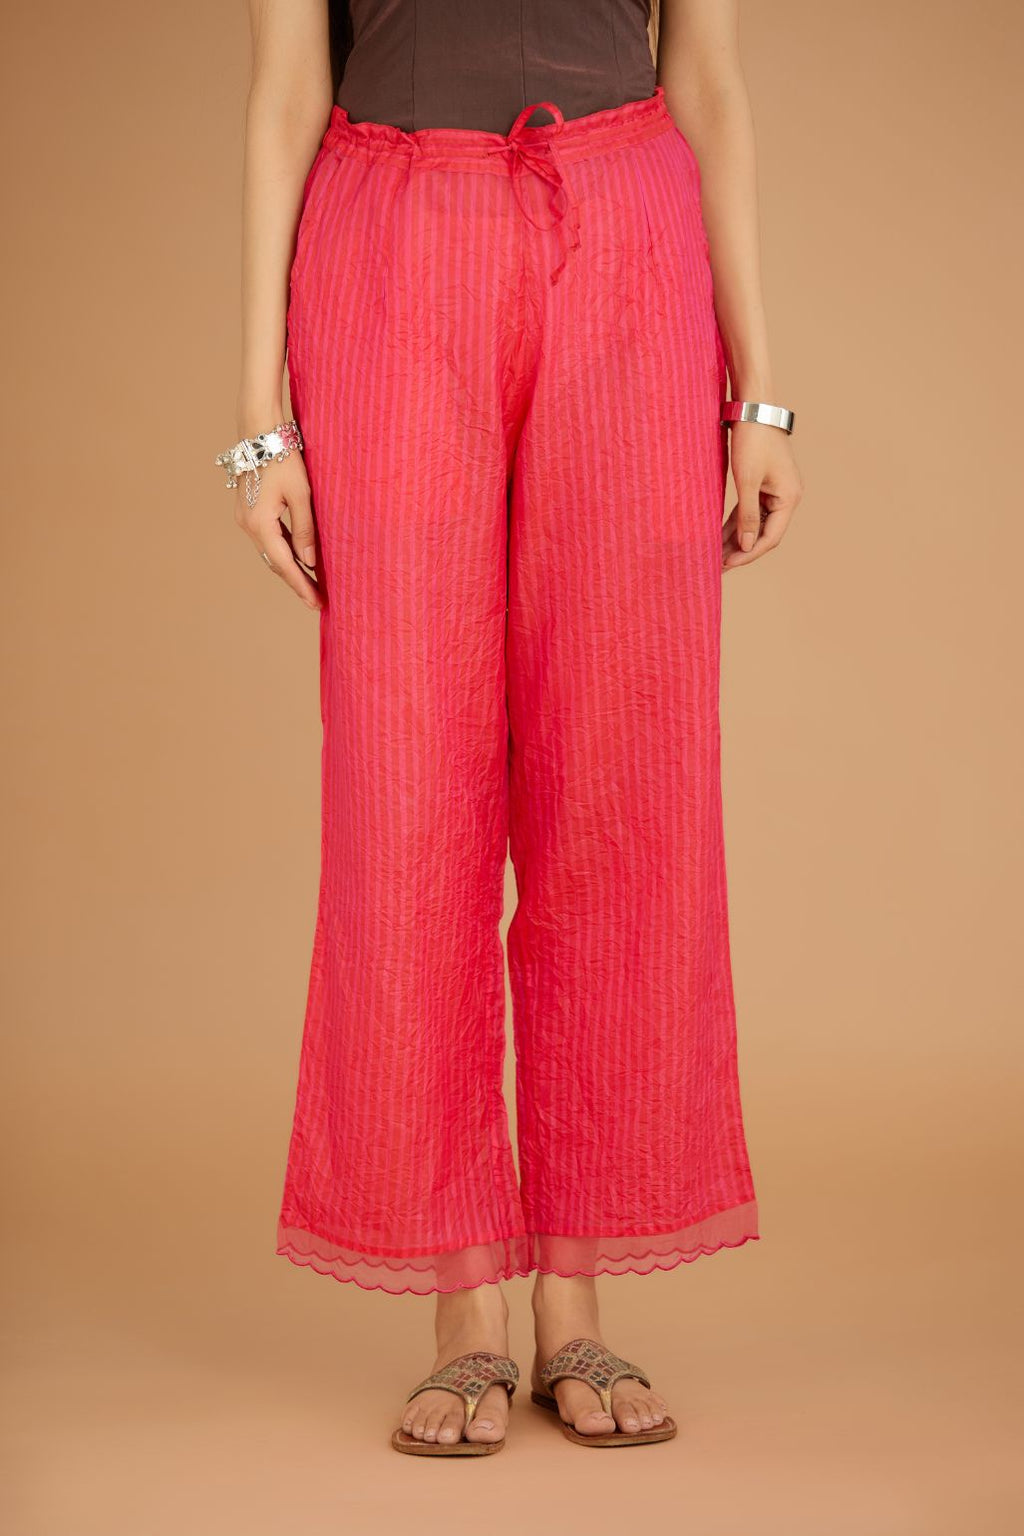 Fuchsia hand crushed silk pants with hand block print fine stripes and organza fabric and embroidery detail at bottom hem.